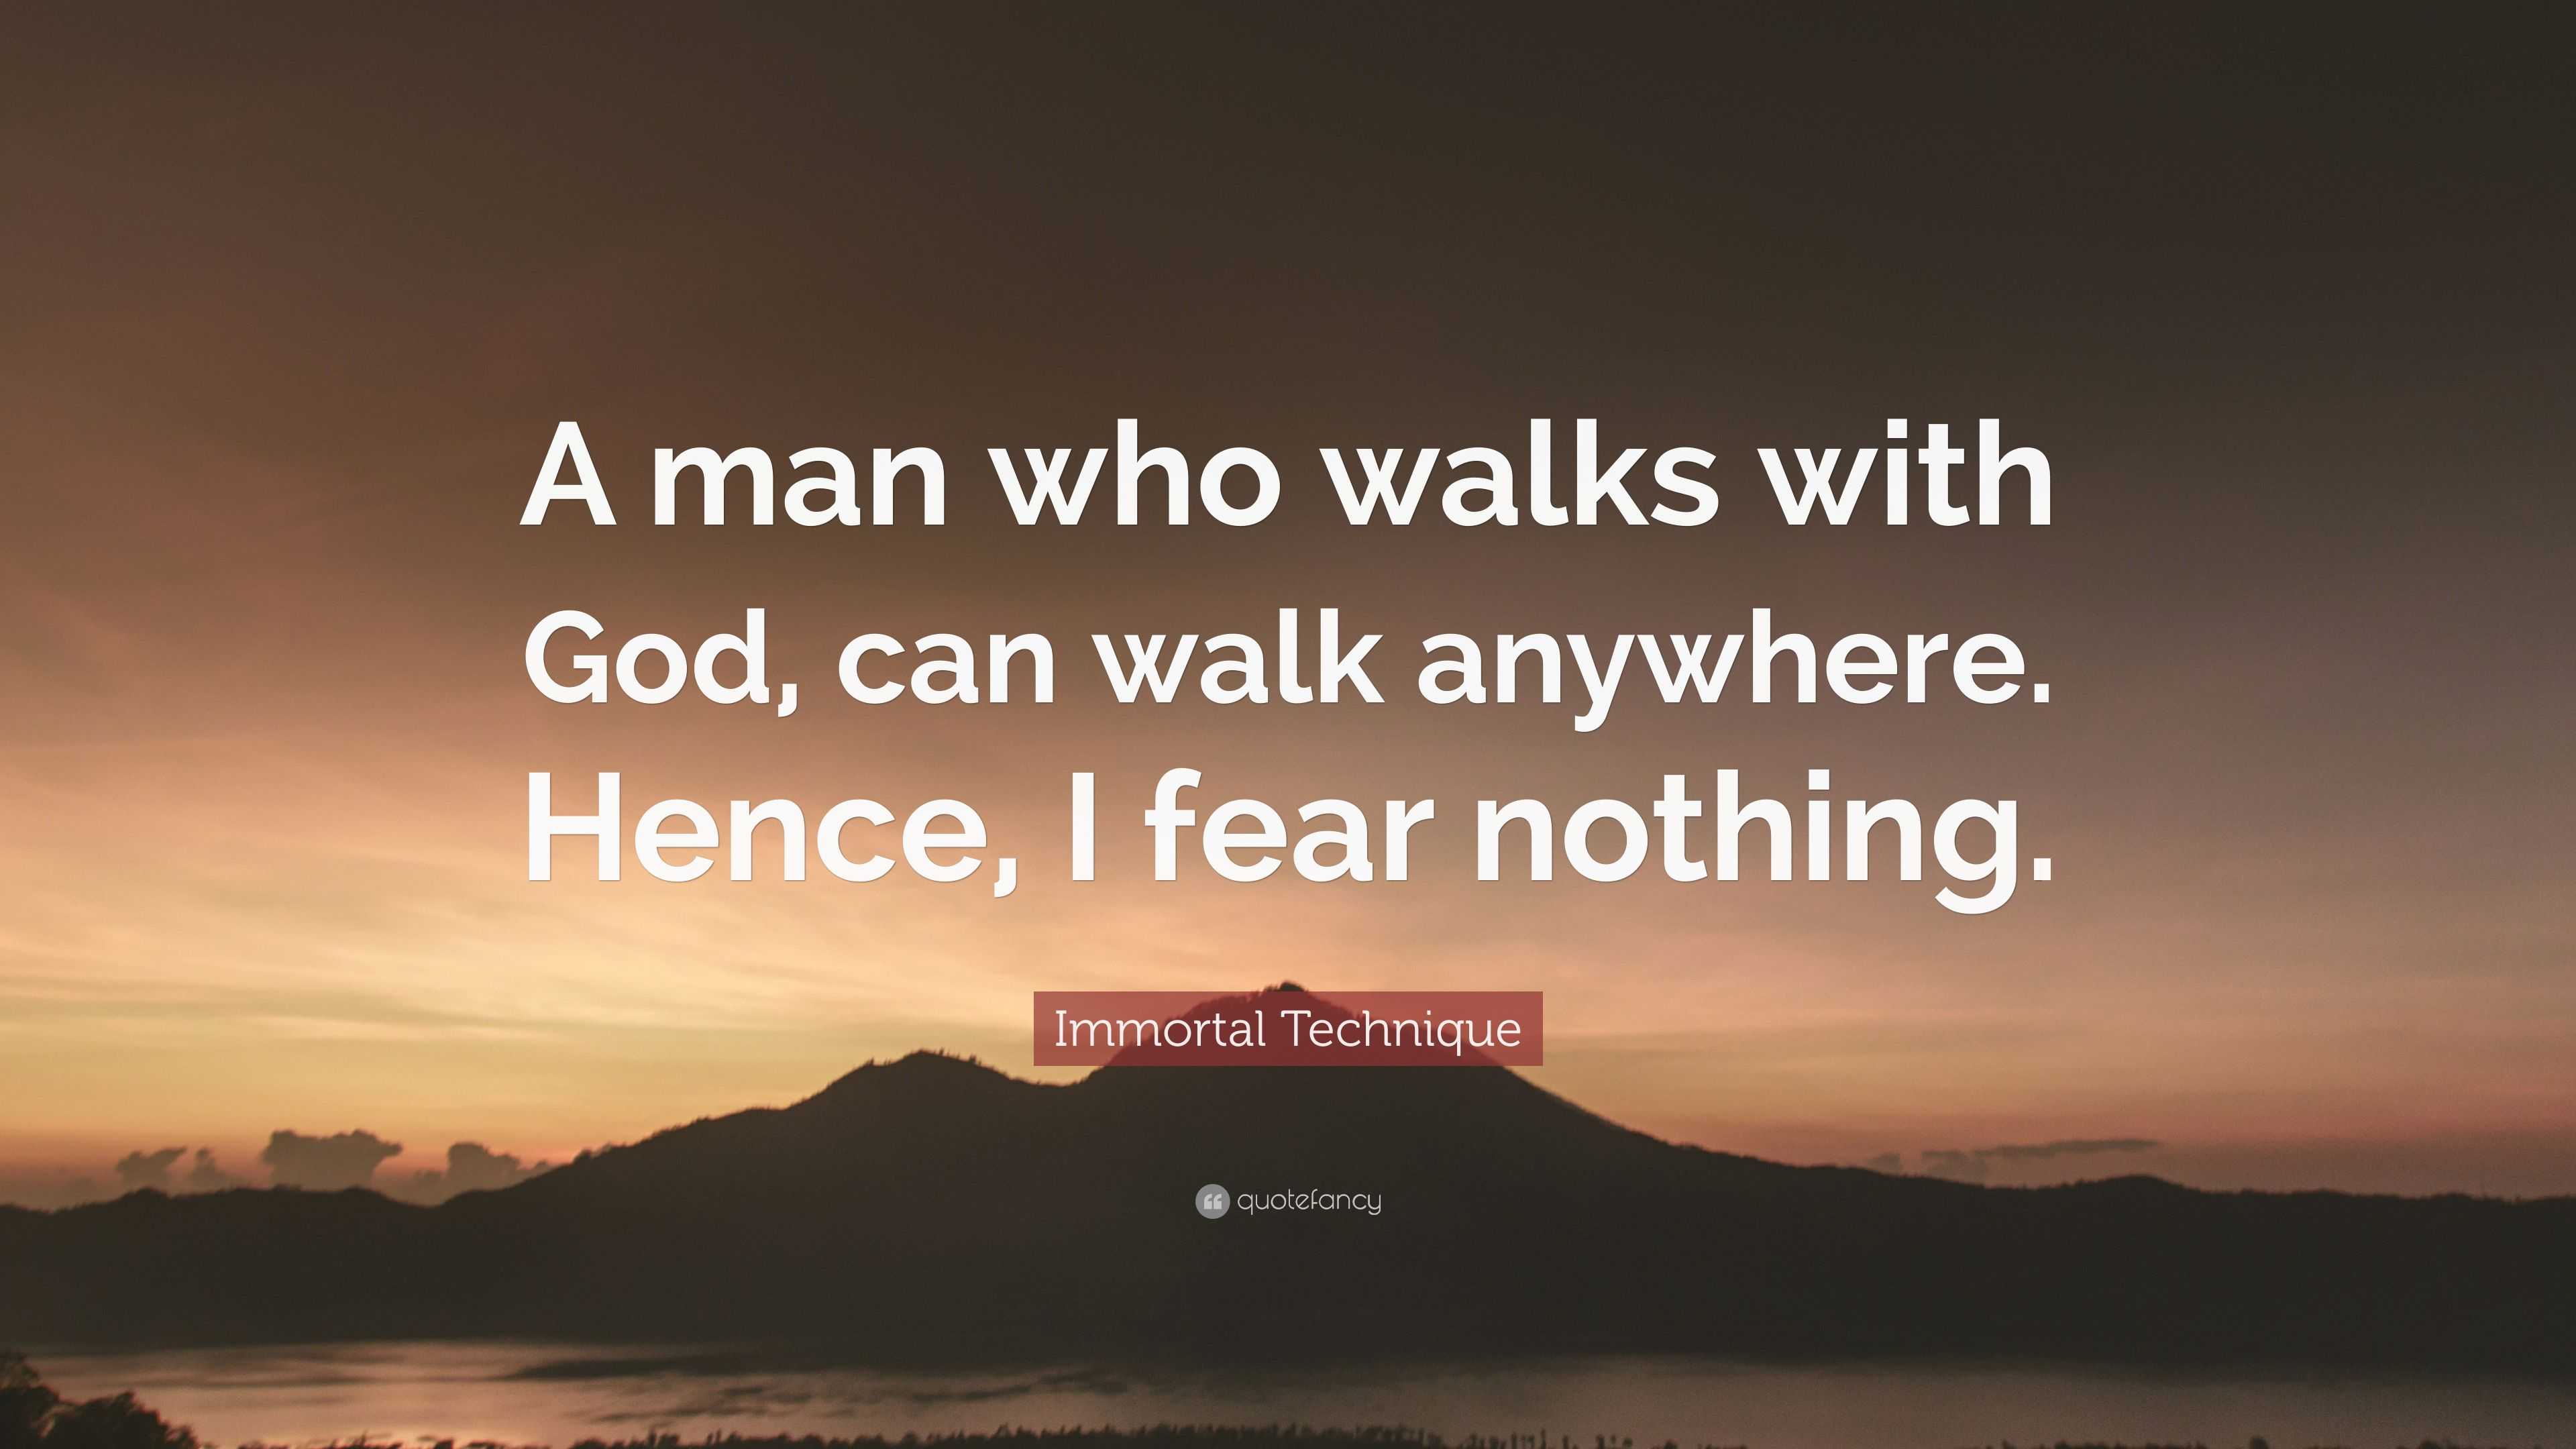 Immortal Technique Quote: “A man who walks with God, can walk anywhere ...